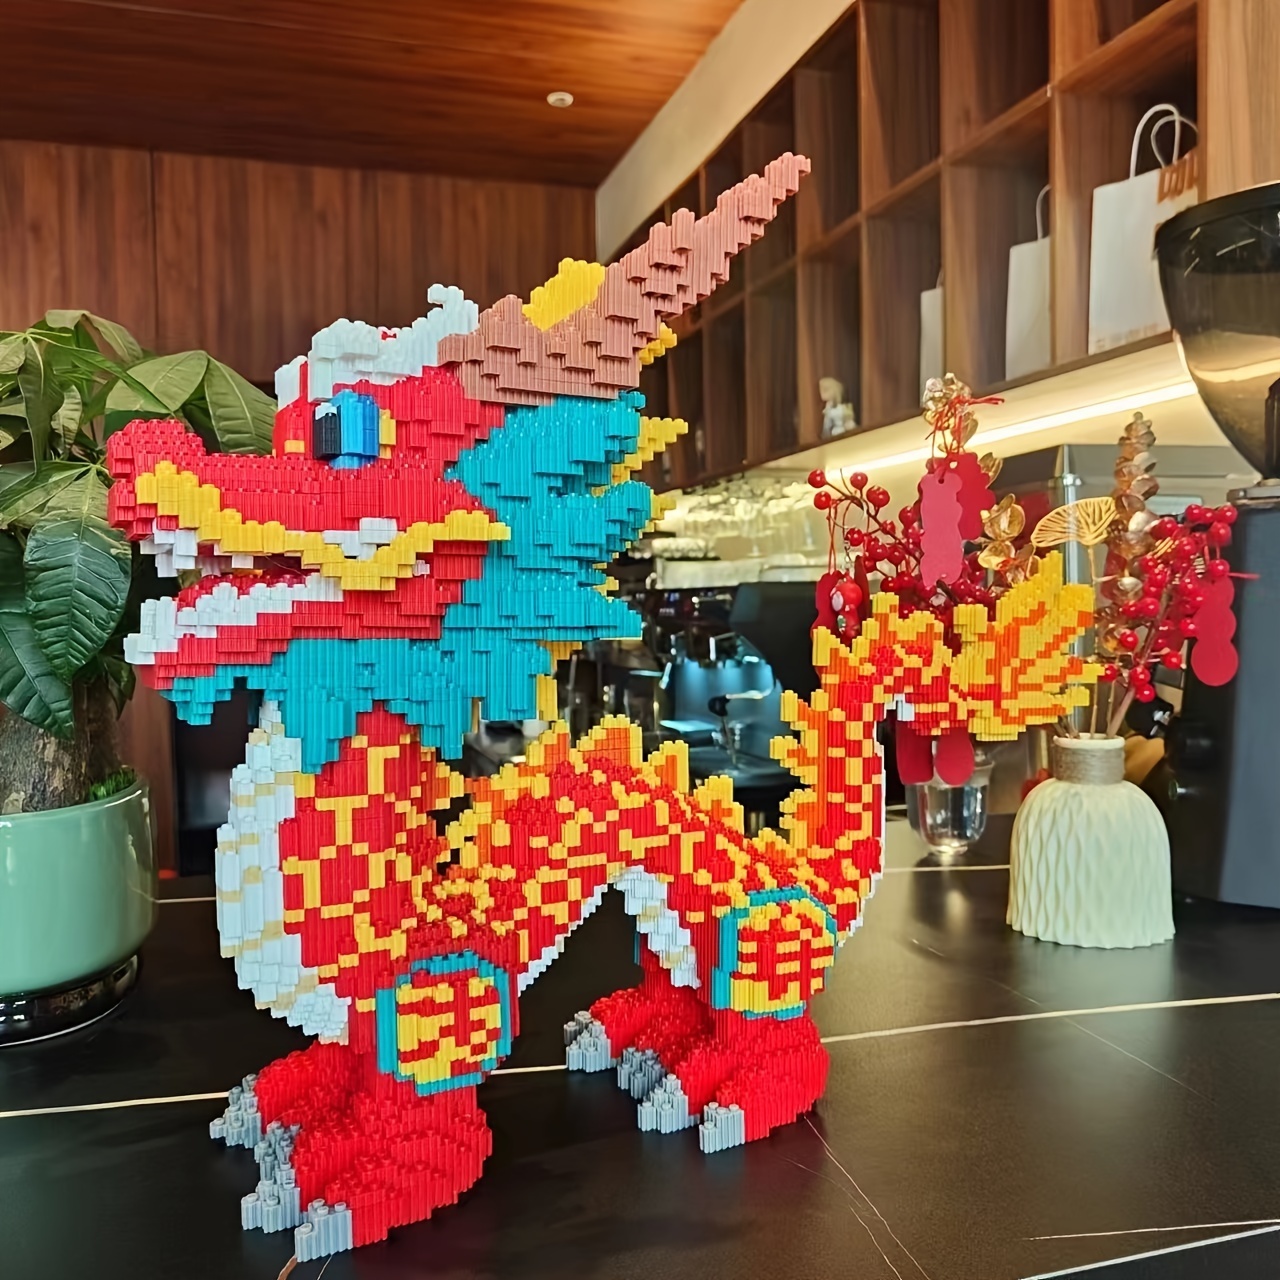 

6500-piece Great Wall Dragon Building Blocks Set - Unique Diy Craft Kit For Adults, Perfect For Office Decor & Creative Gifts - Ideal For Girls, Thanksgiving, Christmas, Halloween